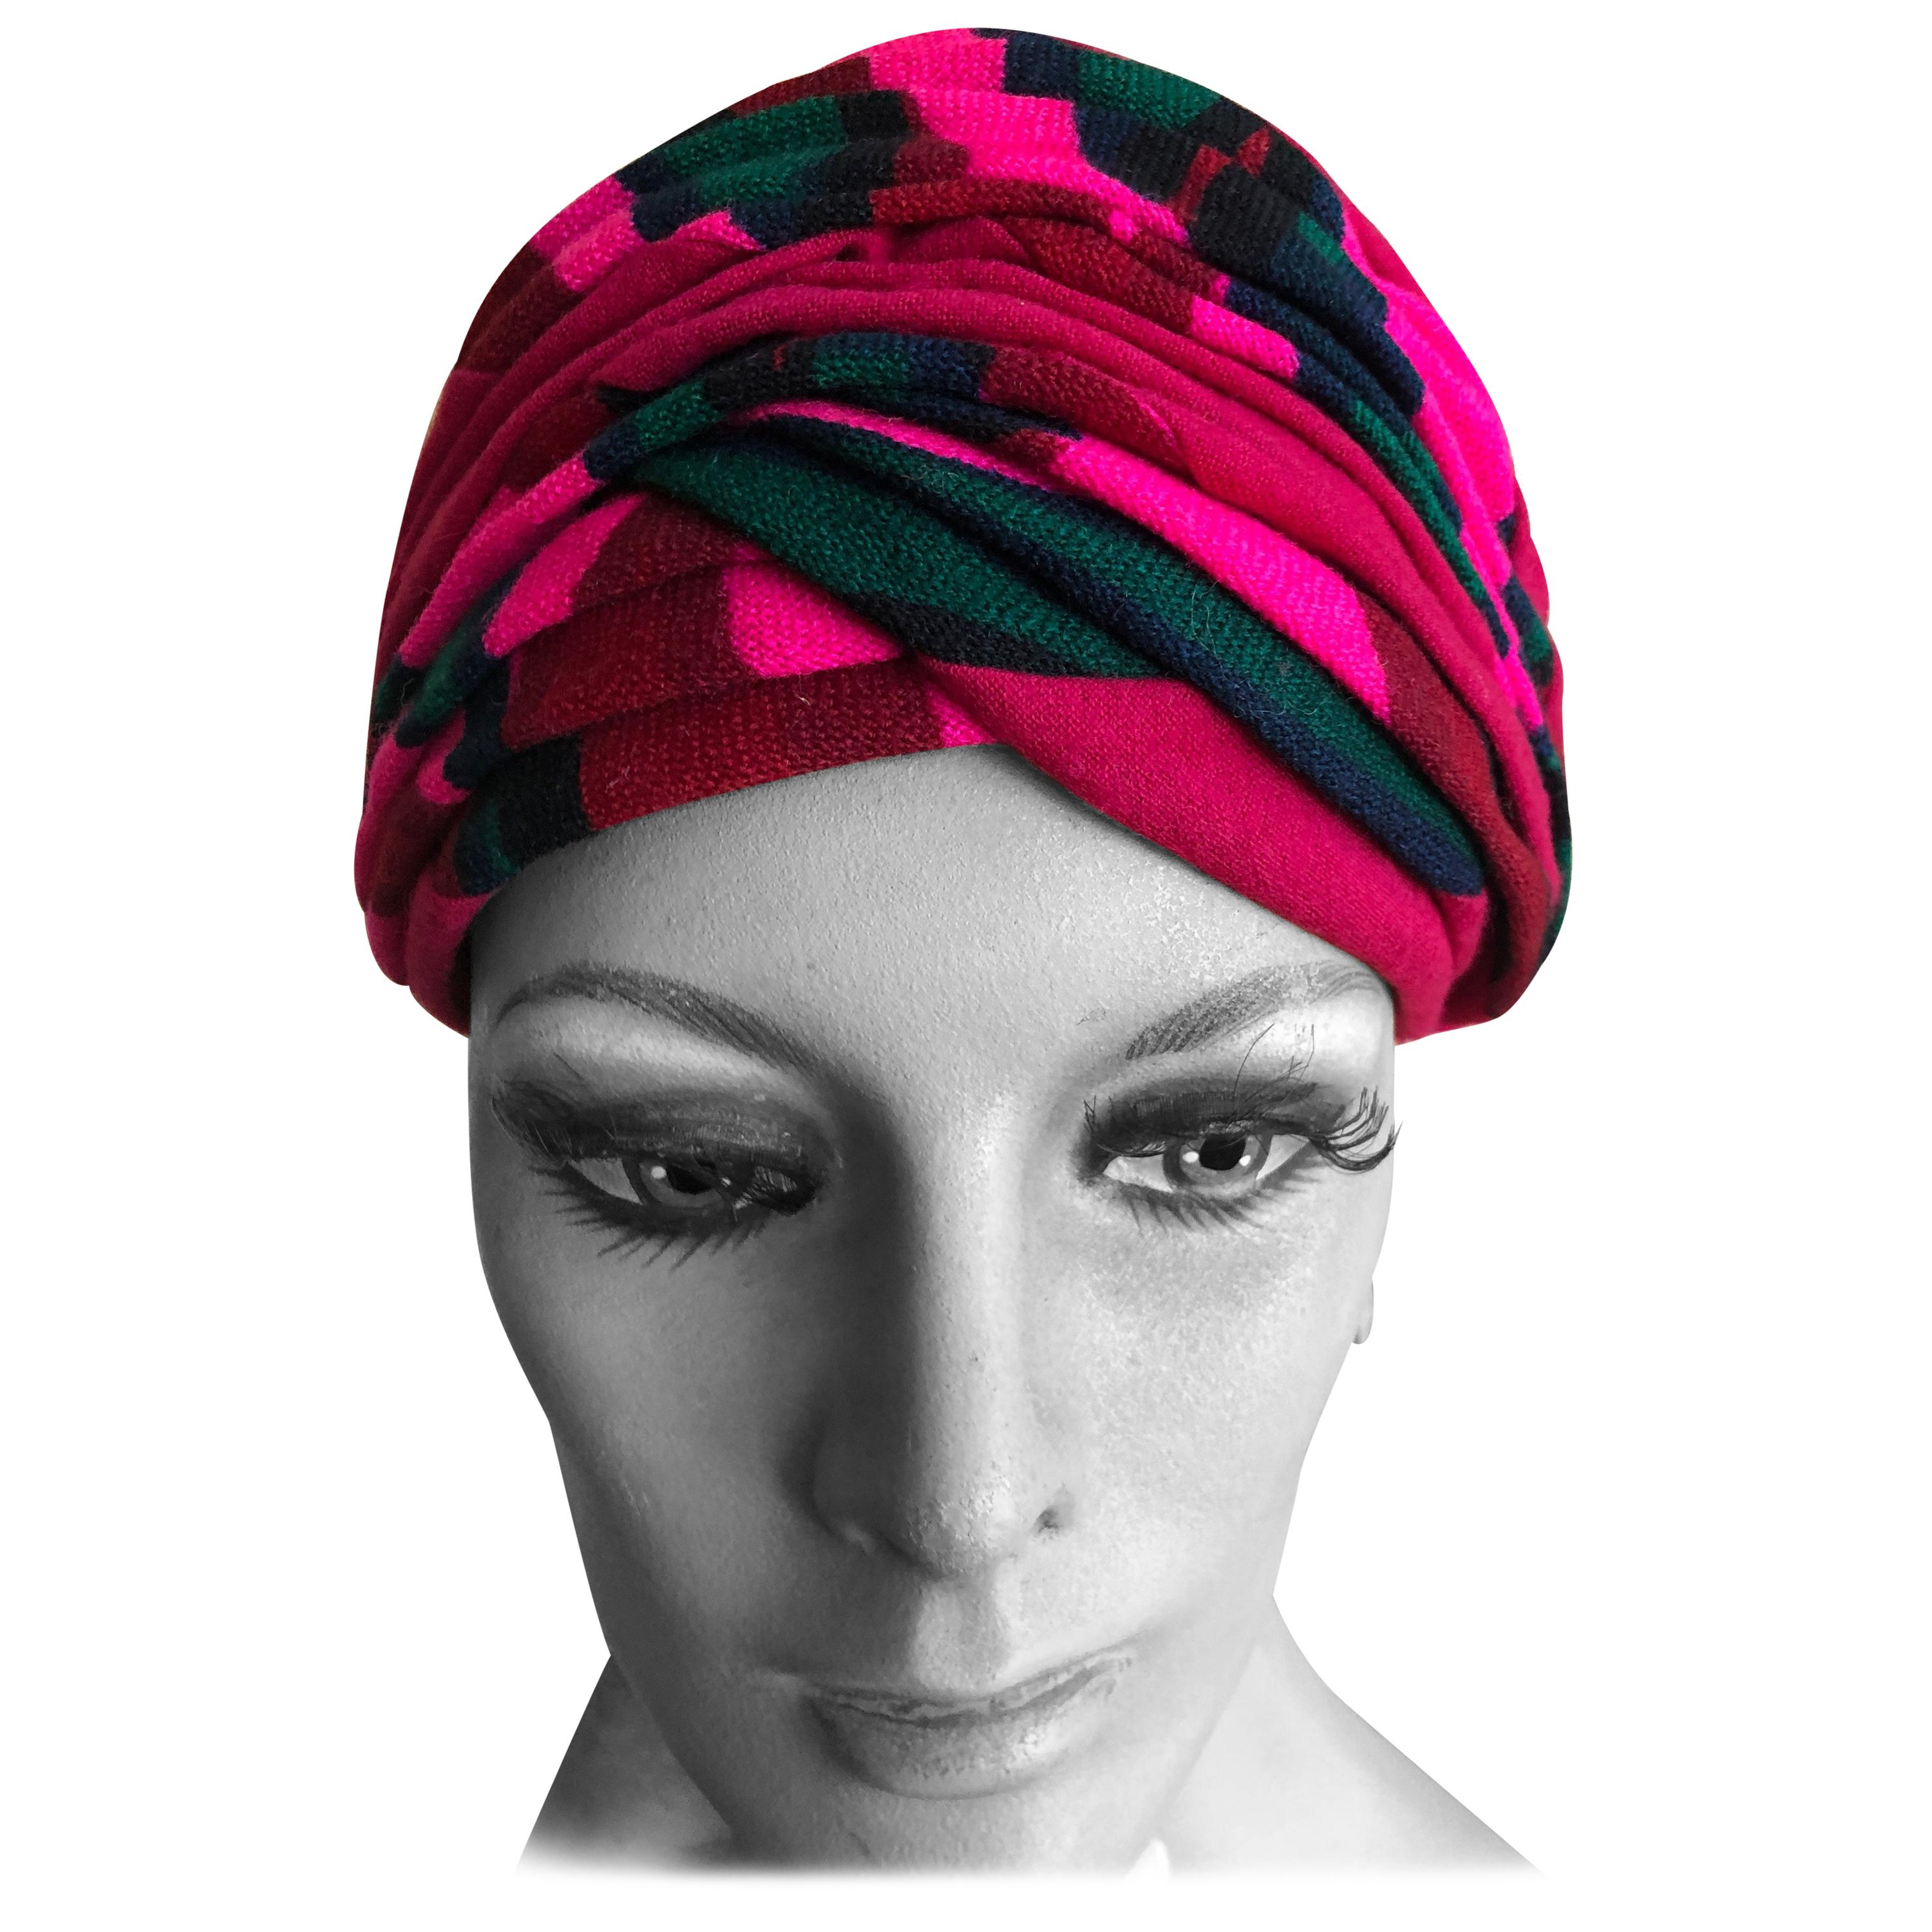 Christian Dior Chapeaux Colorful 60's Turban   For Sale